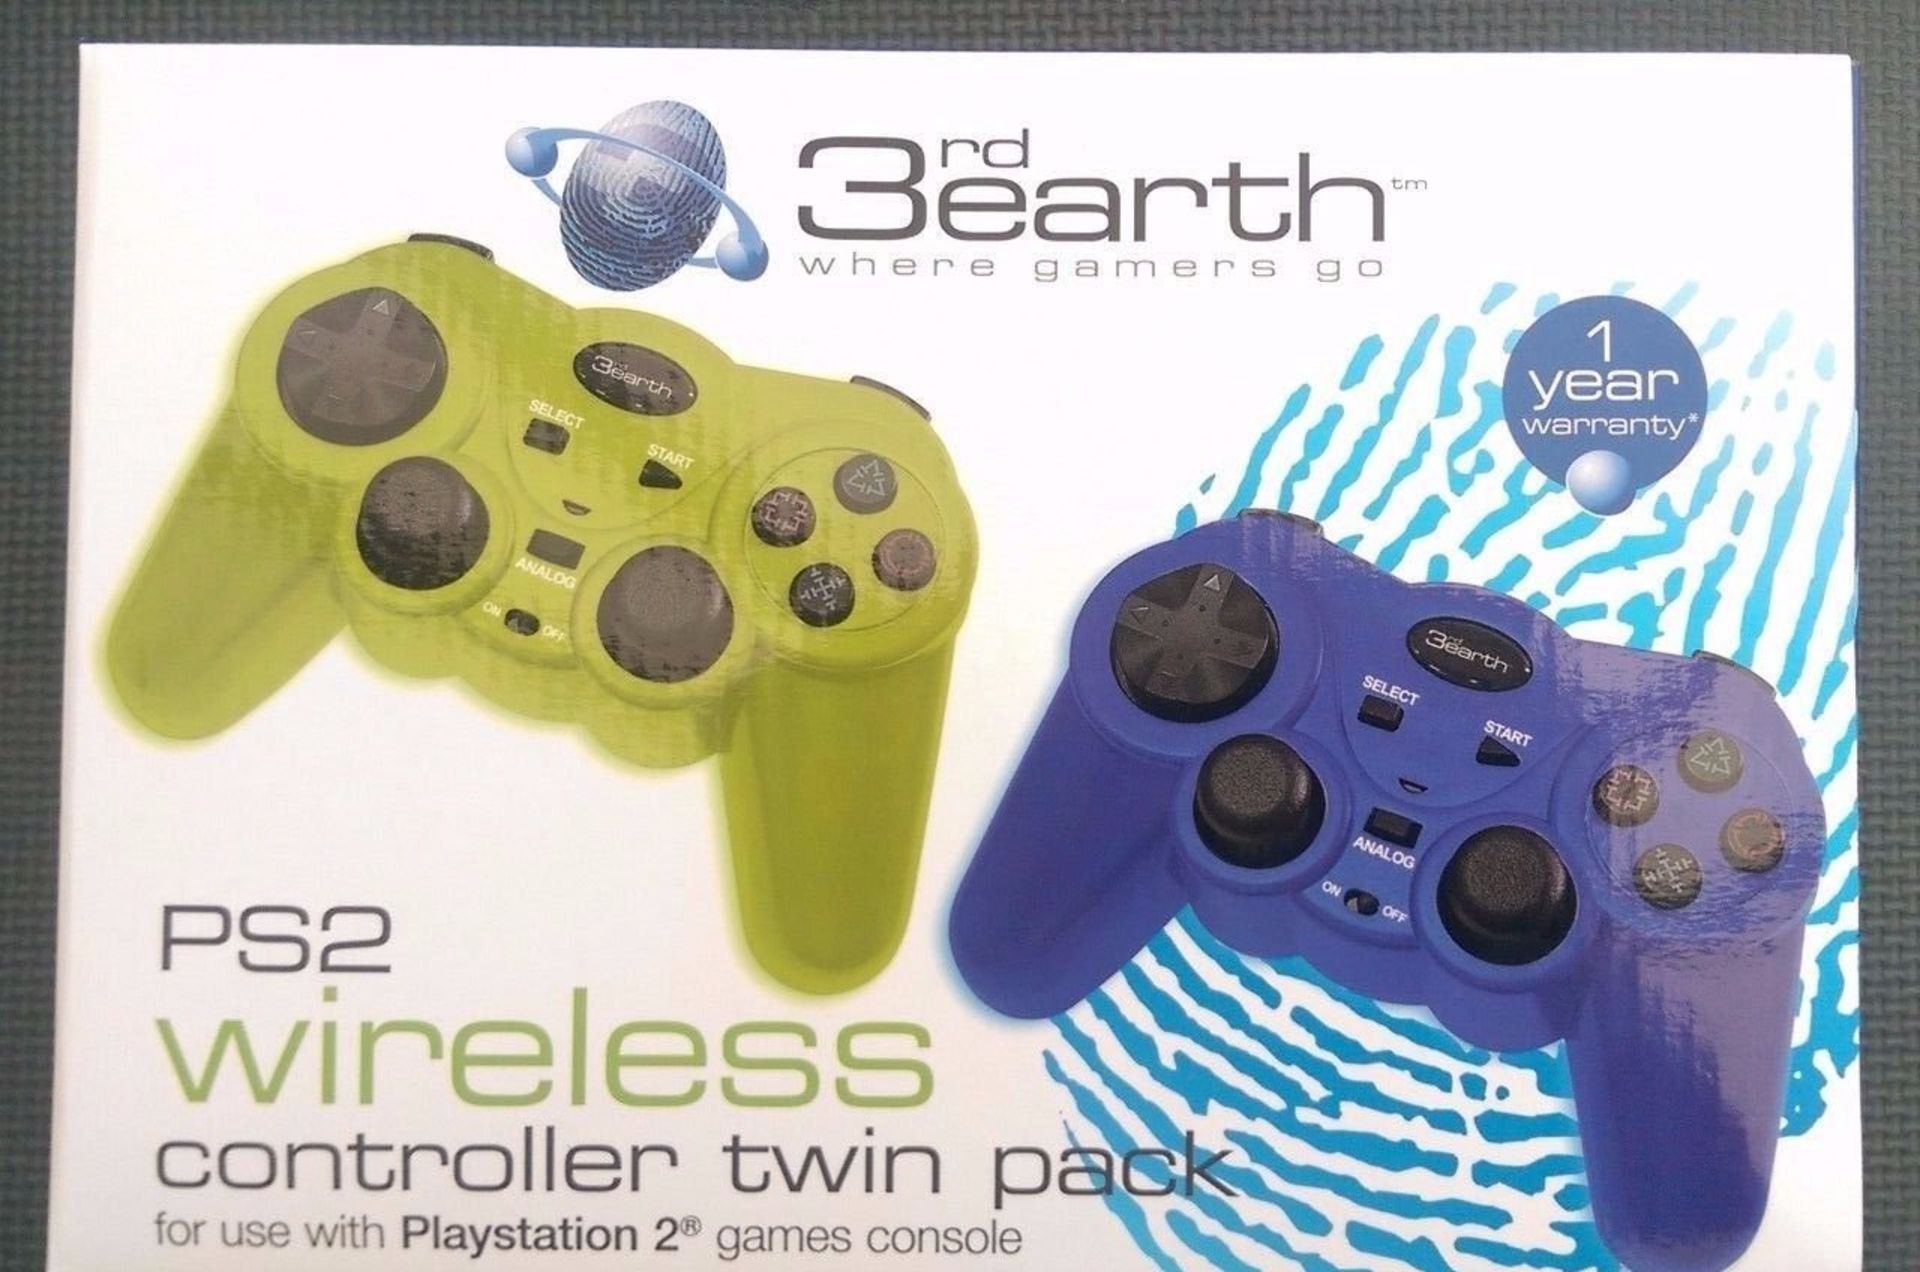 10pcs x Sealed 3rd Earth twin pack gaming controller kit